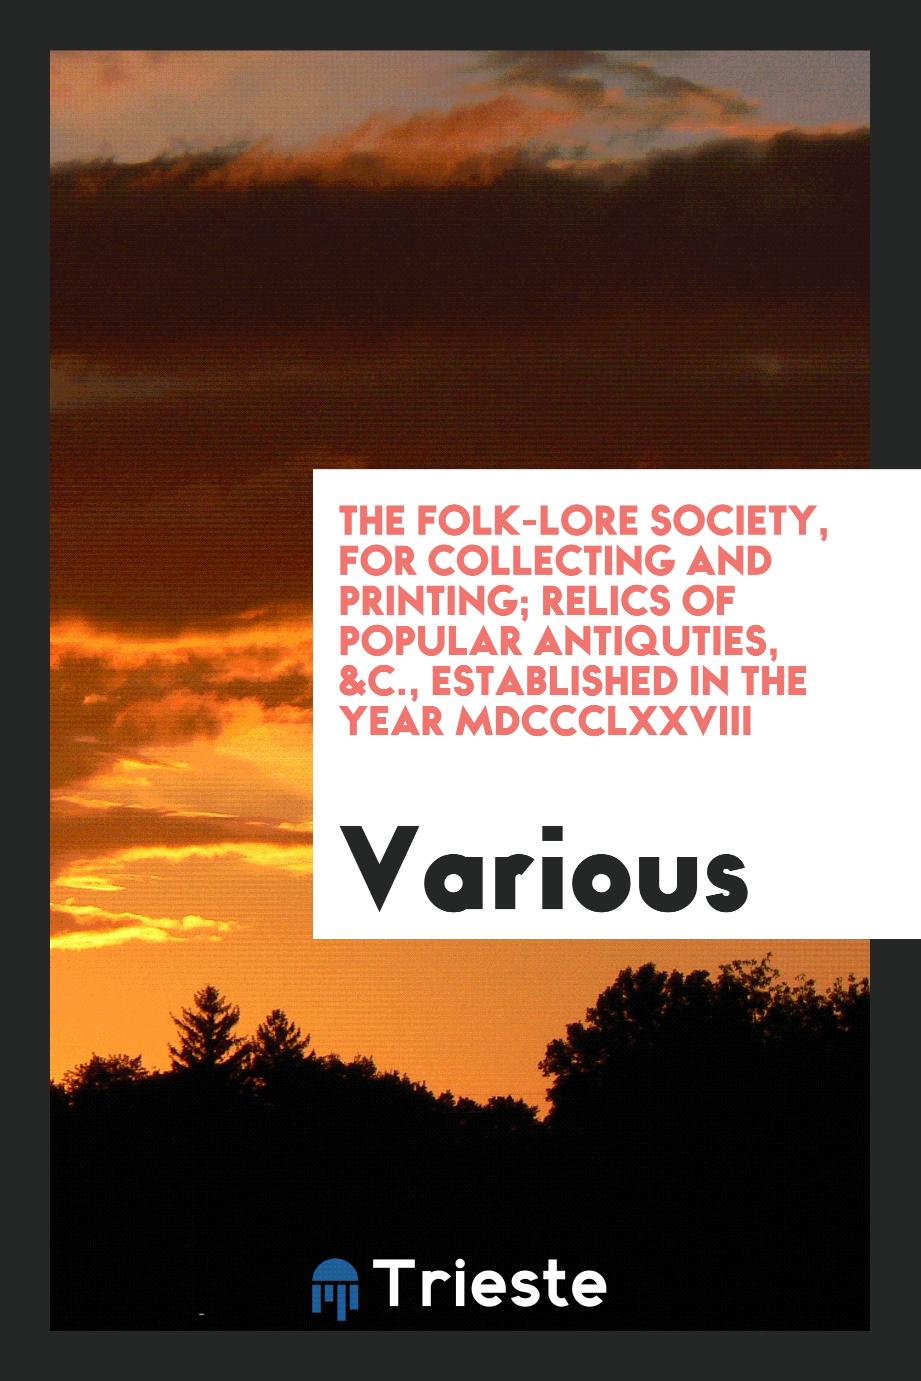 The folk-lore society, for collecting and printing; relics of popular antiquties, &c., established in the year MDCCCLXXVIII